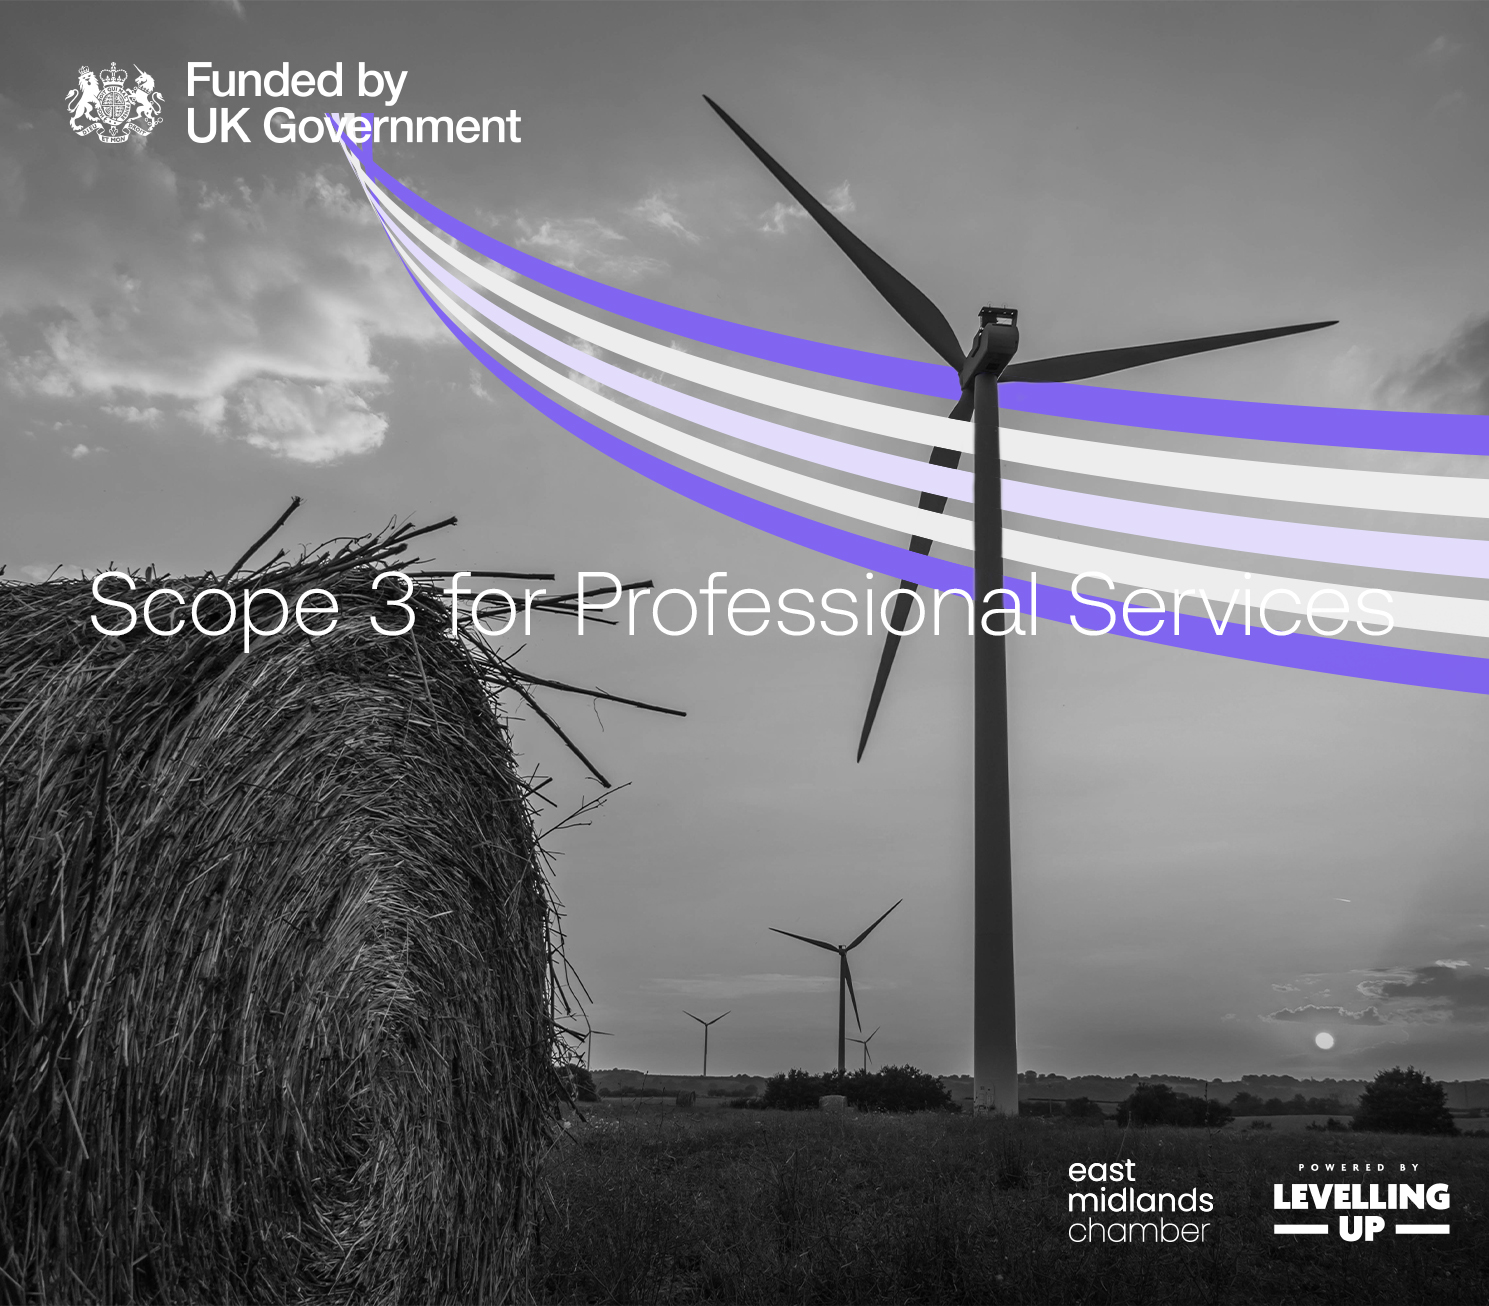 EMC Scope 3 for Professional Services 